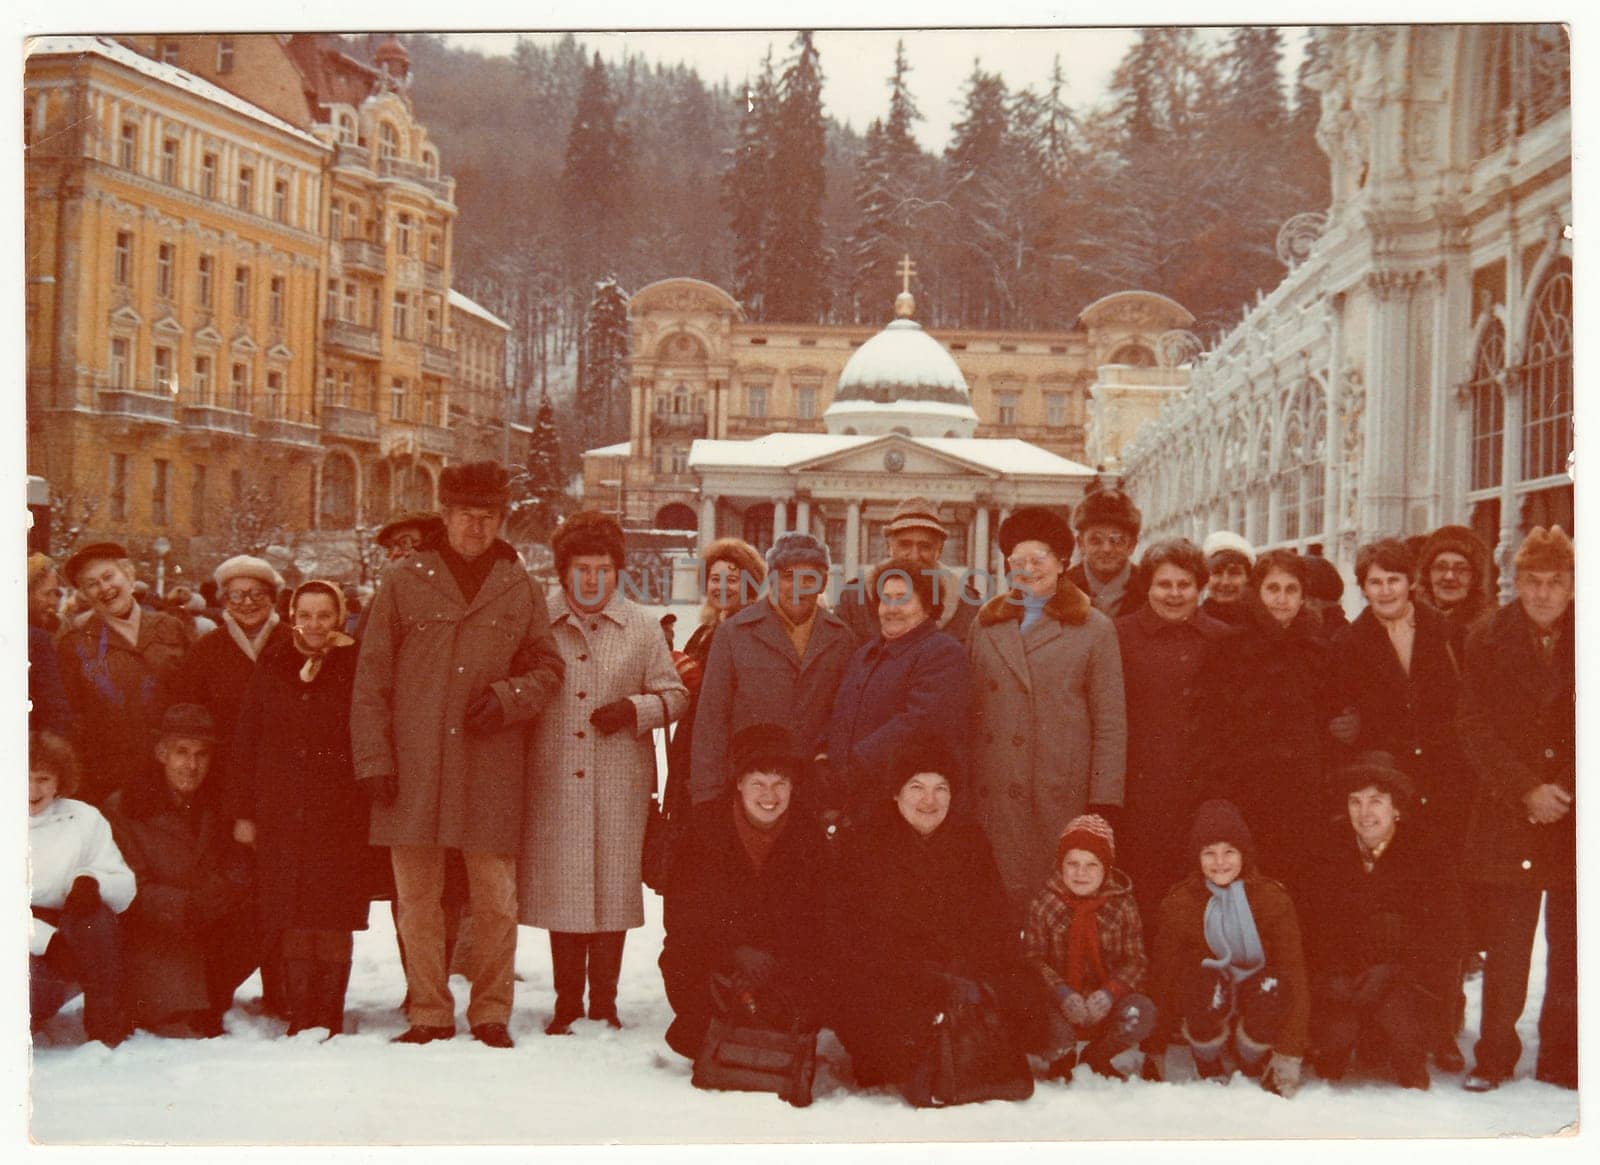 Vintage photo shows group of people on winter vacation. by roman_nerud